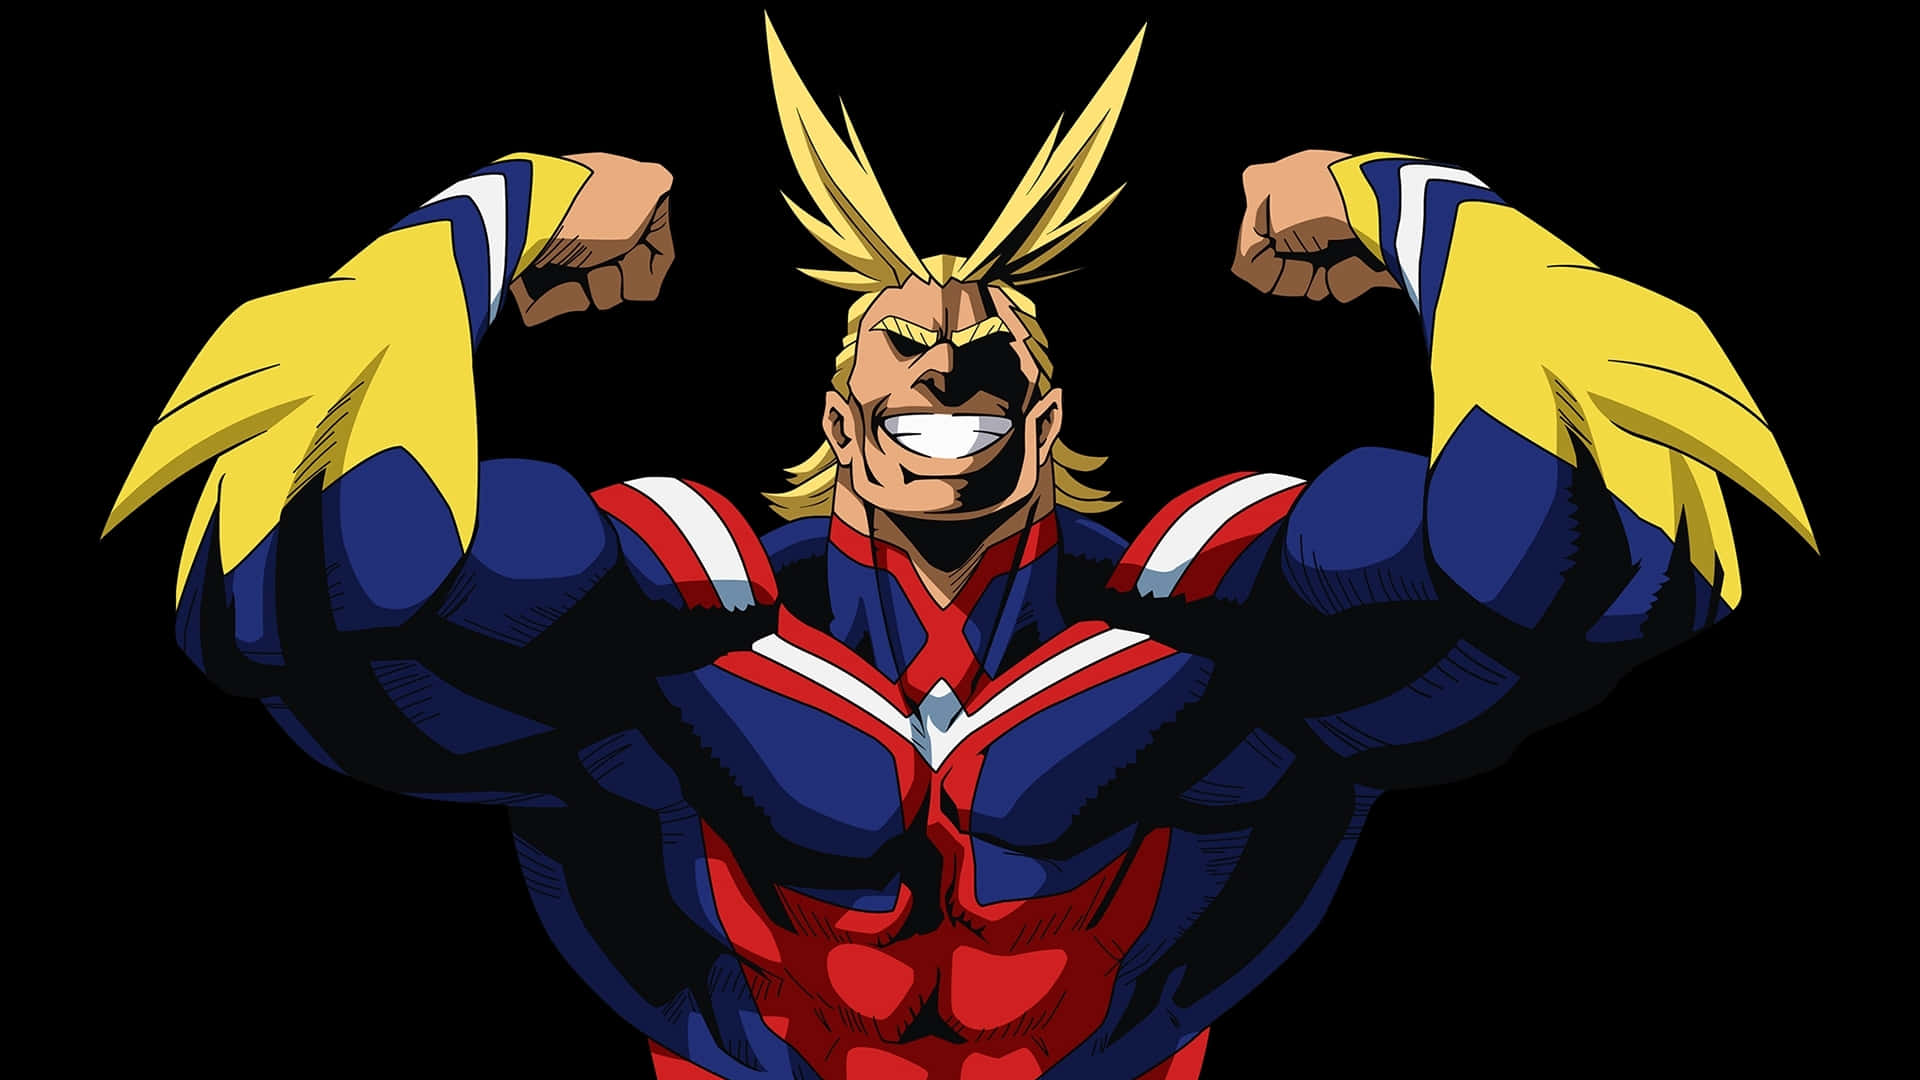 All Might is here to inspire you to never give up!